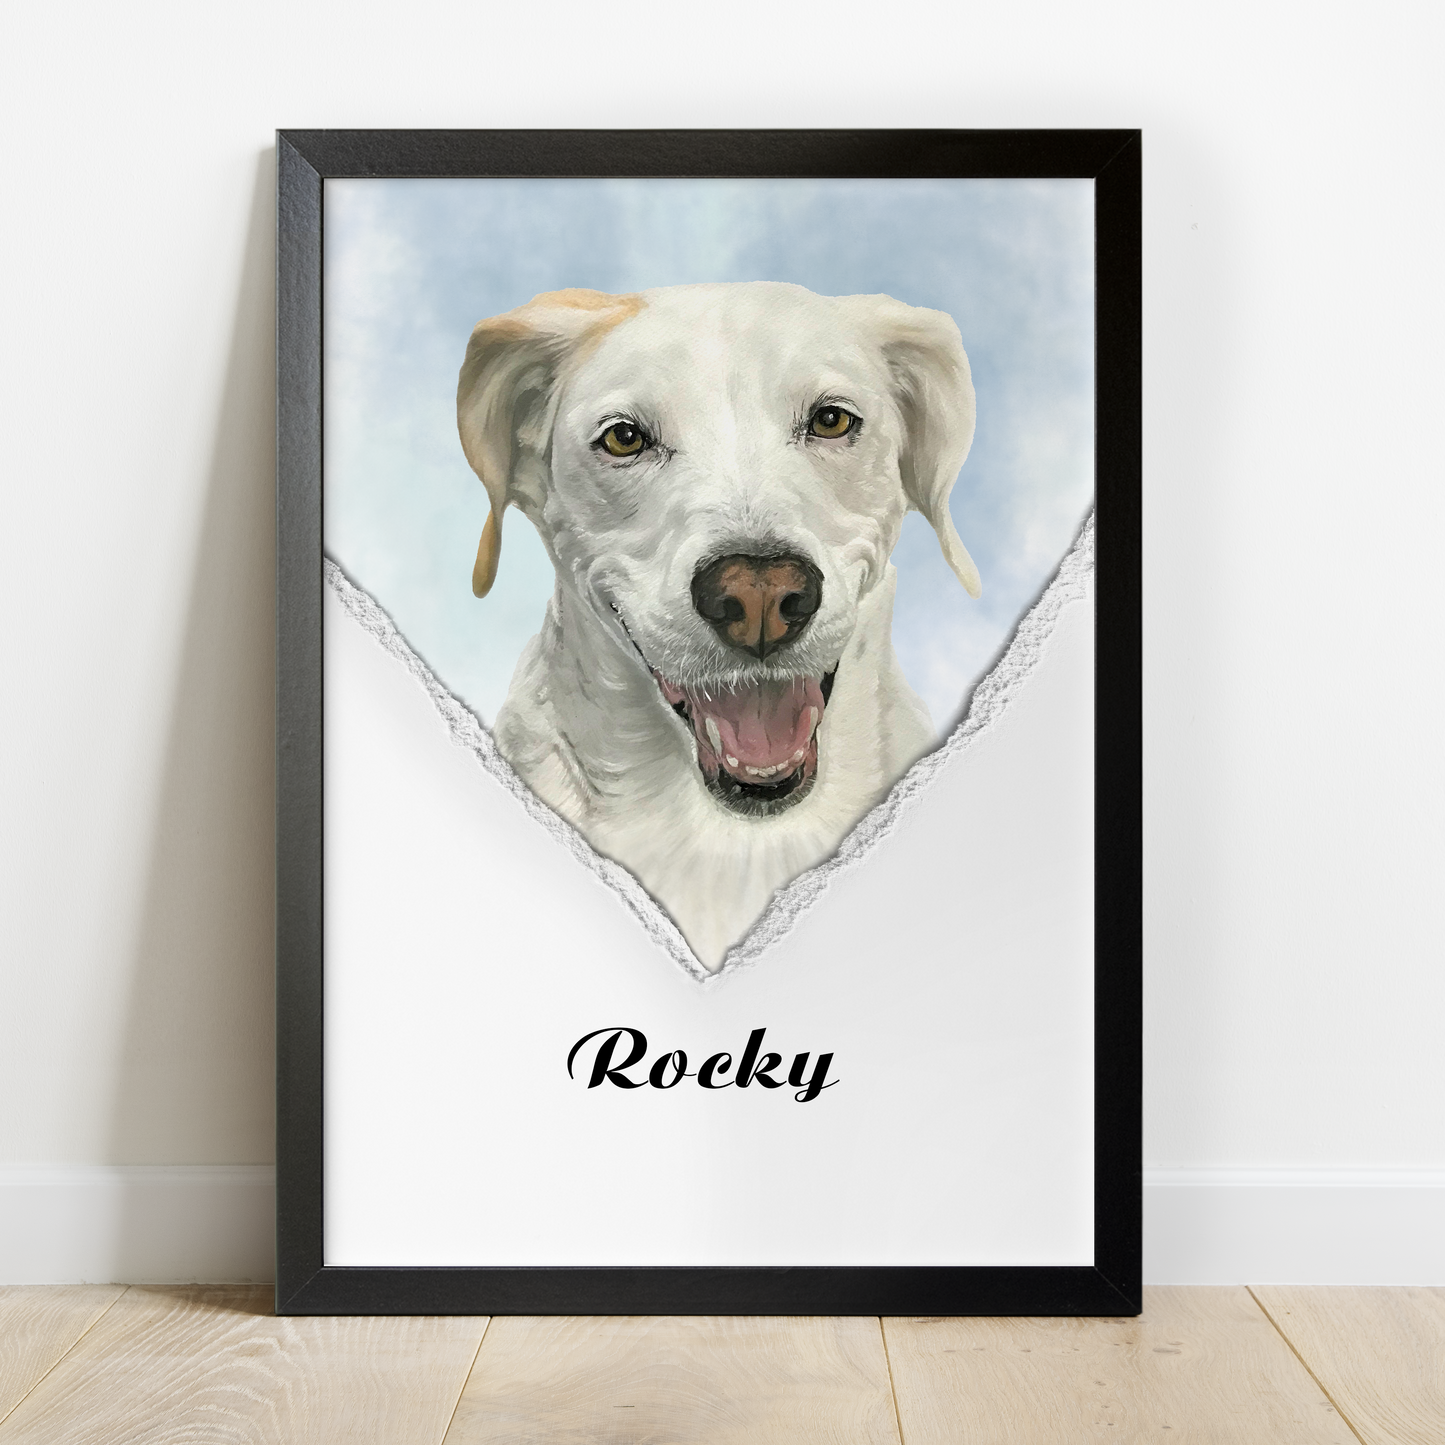 Modern Custom Dog Portrait From Photo 100% Watercolor Hand Painting